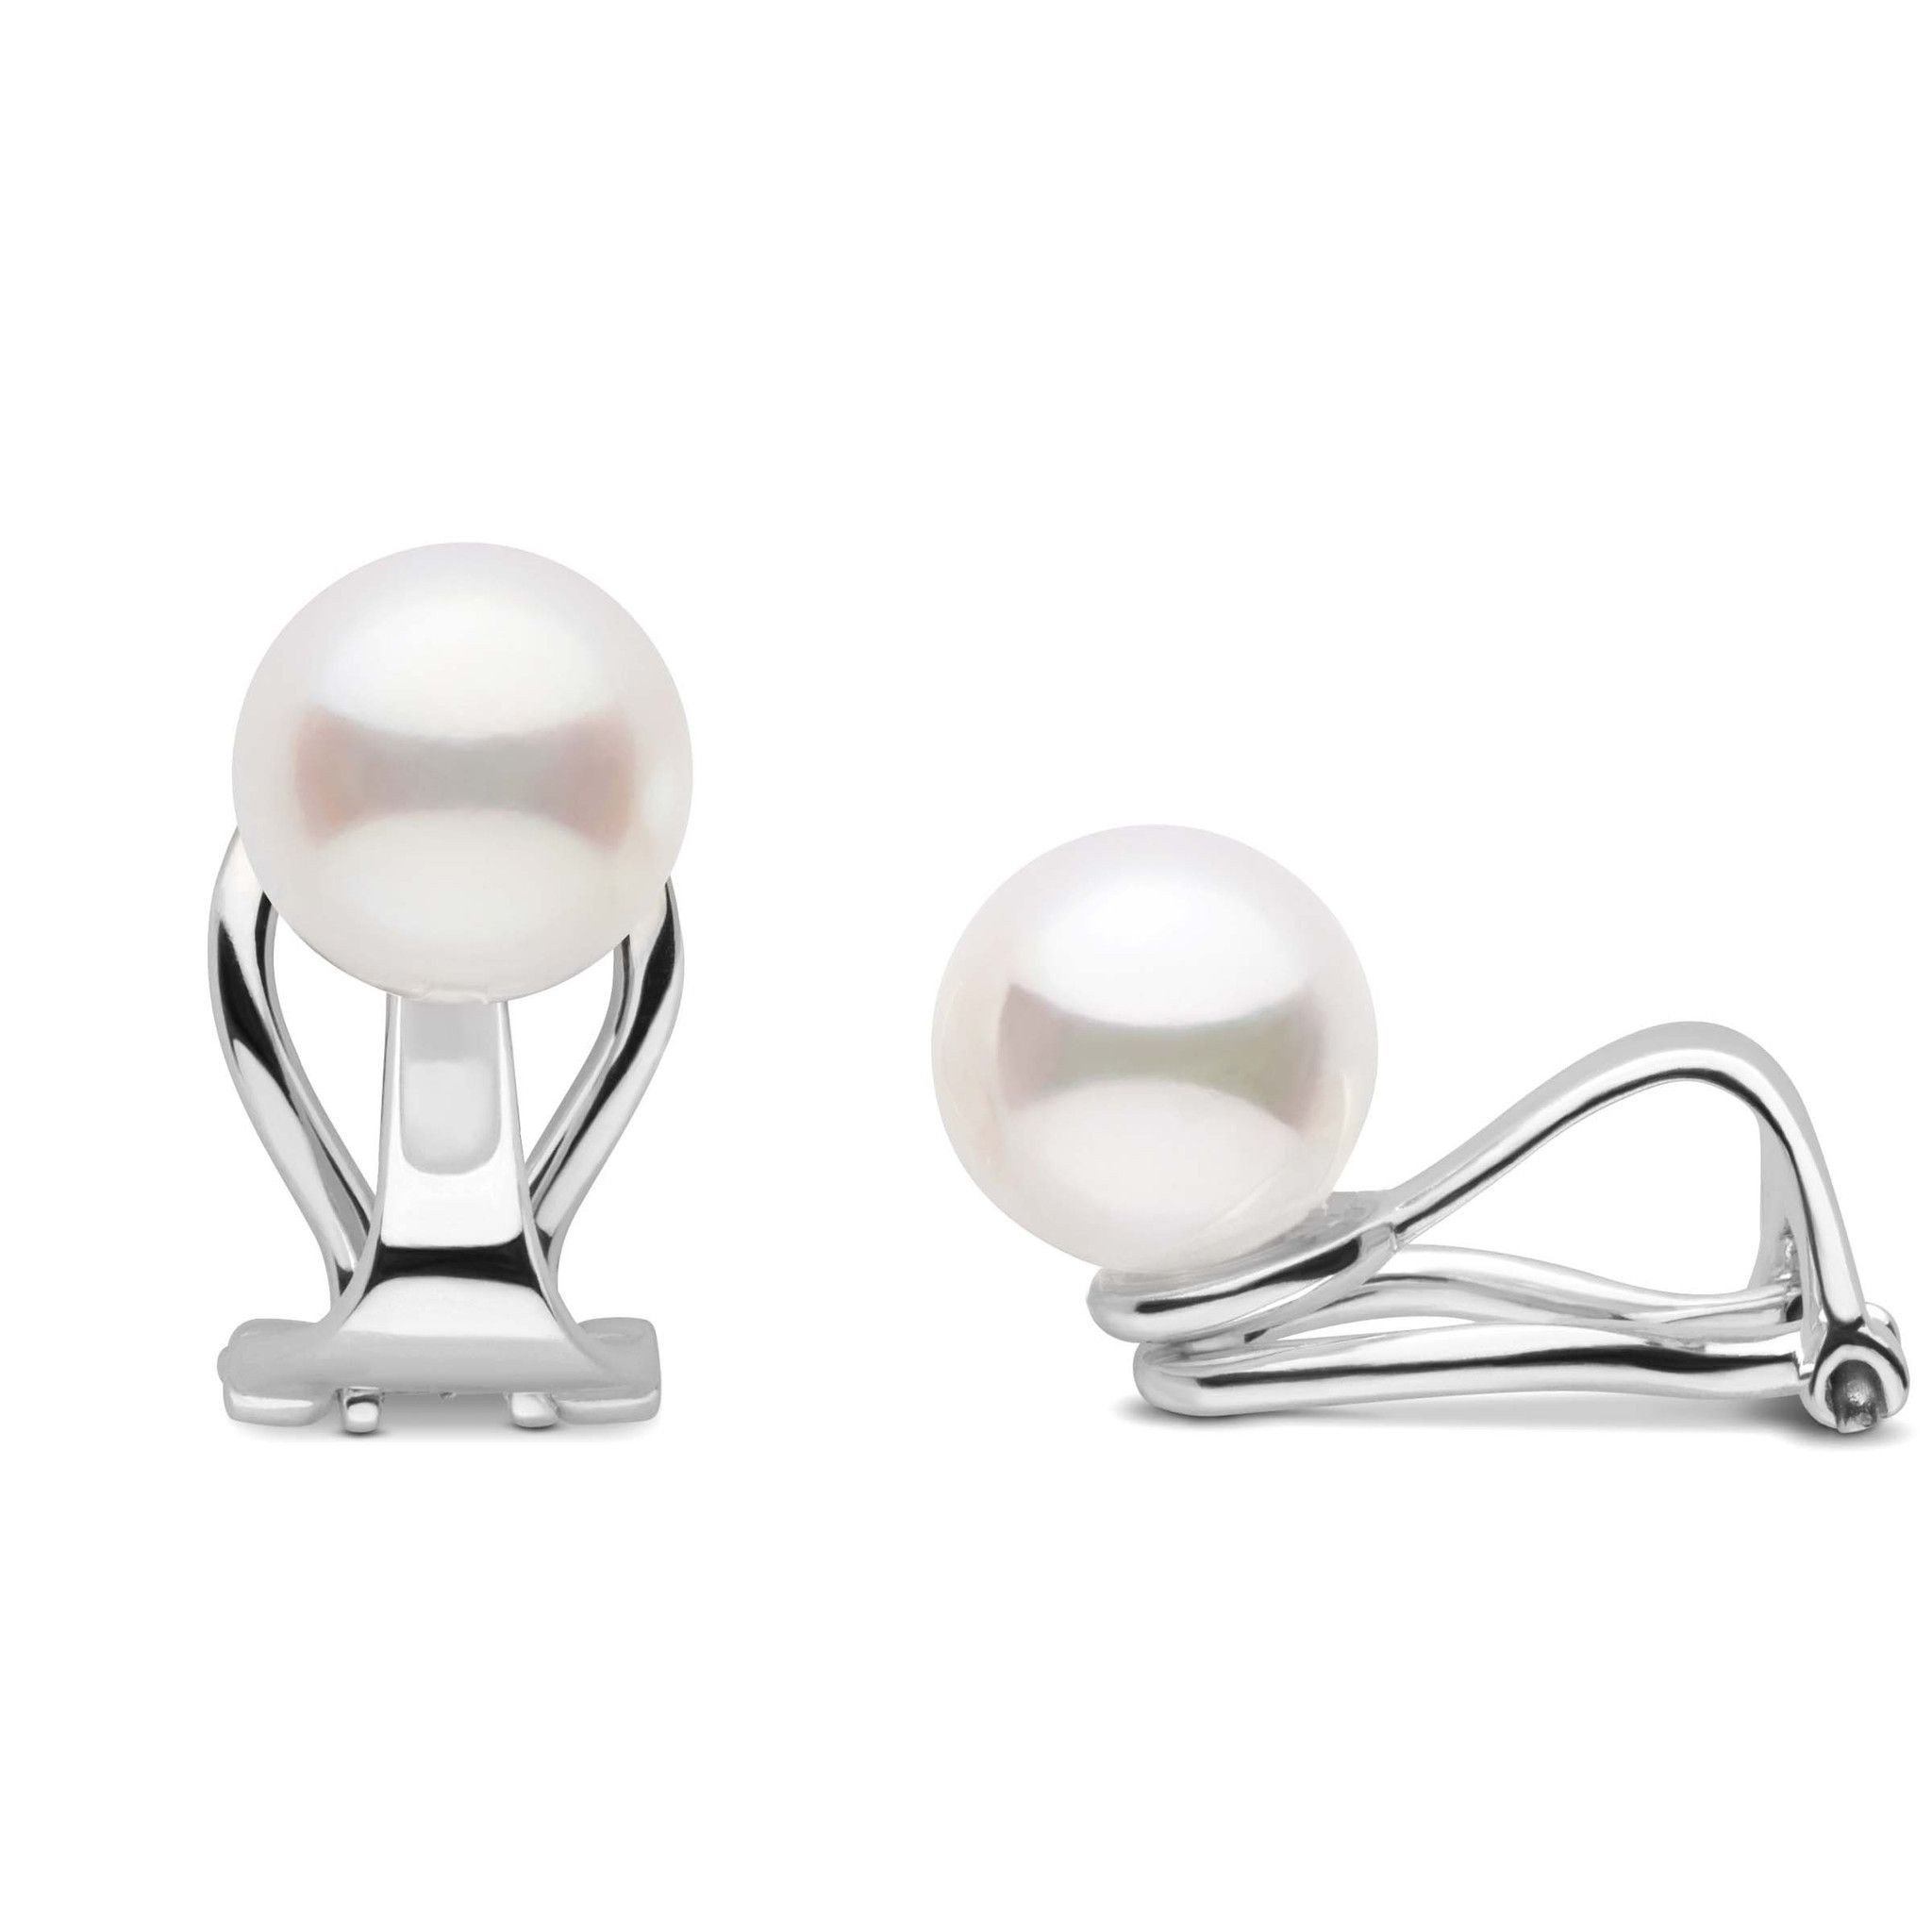 Freshadama freshwater 7.5-8.0 mm Clip-on Pearl Earrings for non-pierced ears in white gold